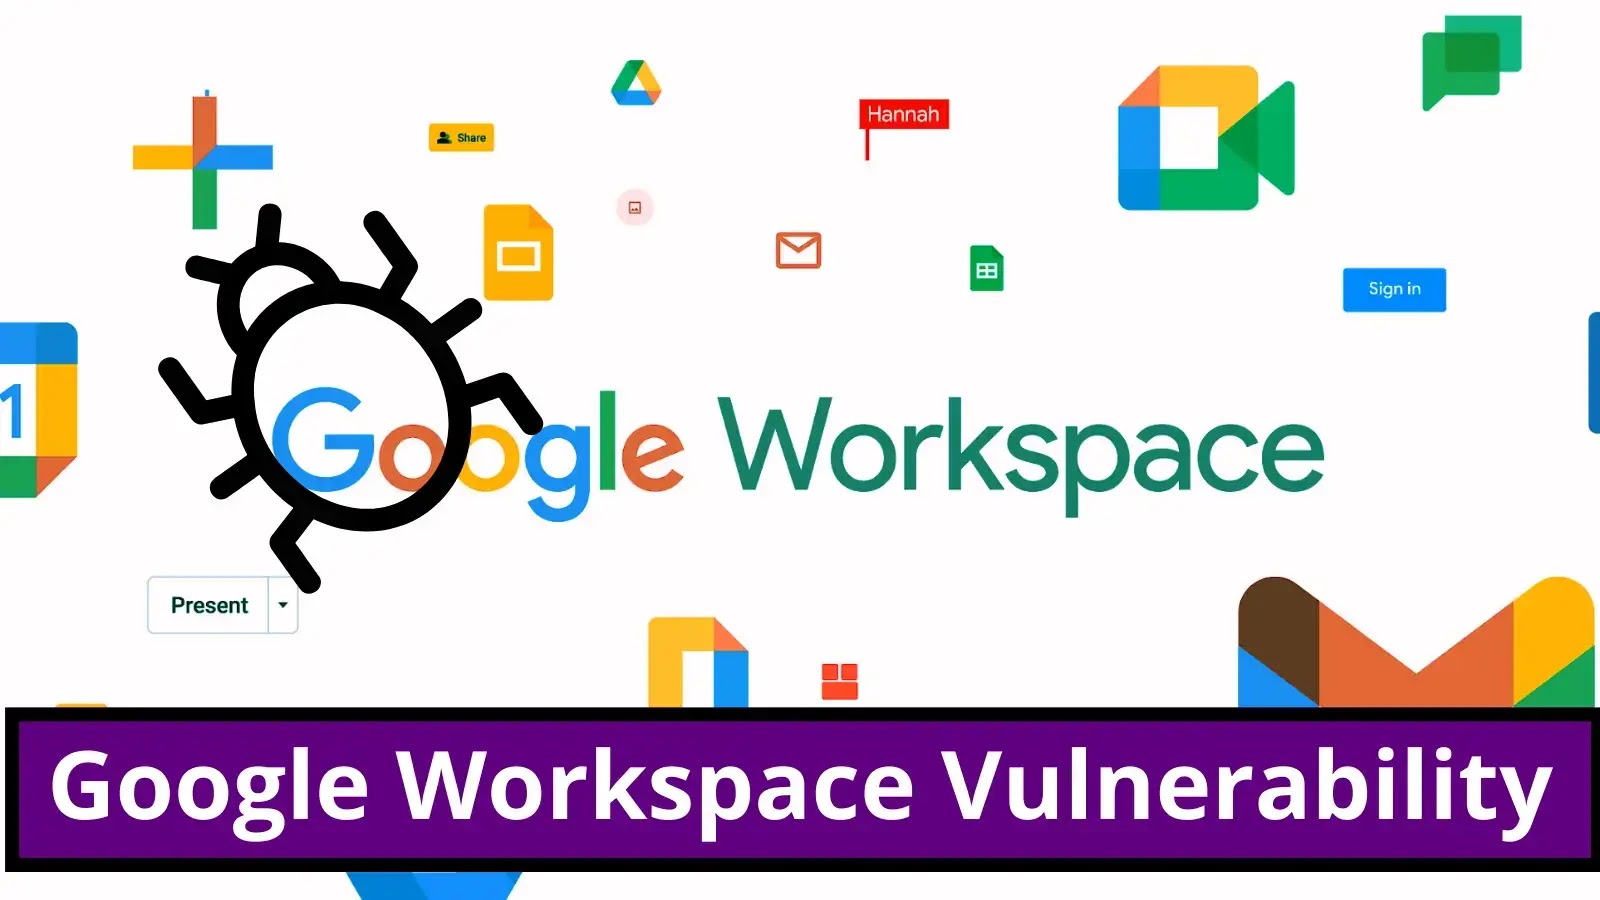 Hackers Exploit Google Workspace to Exfiltrate Data and Deploy Ransomware